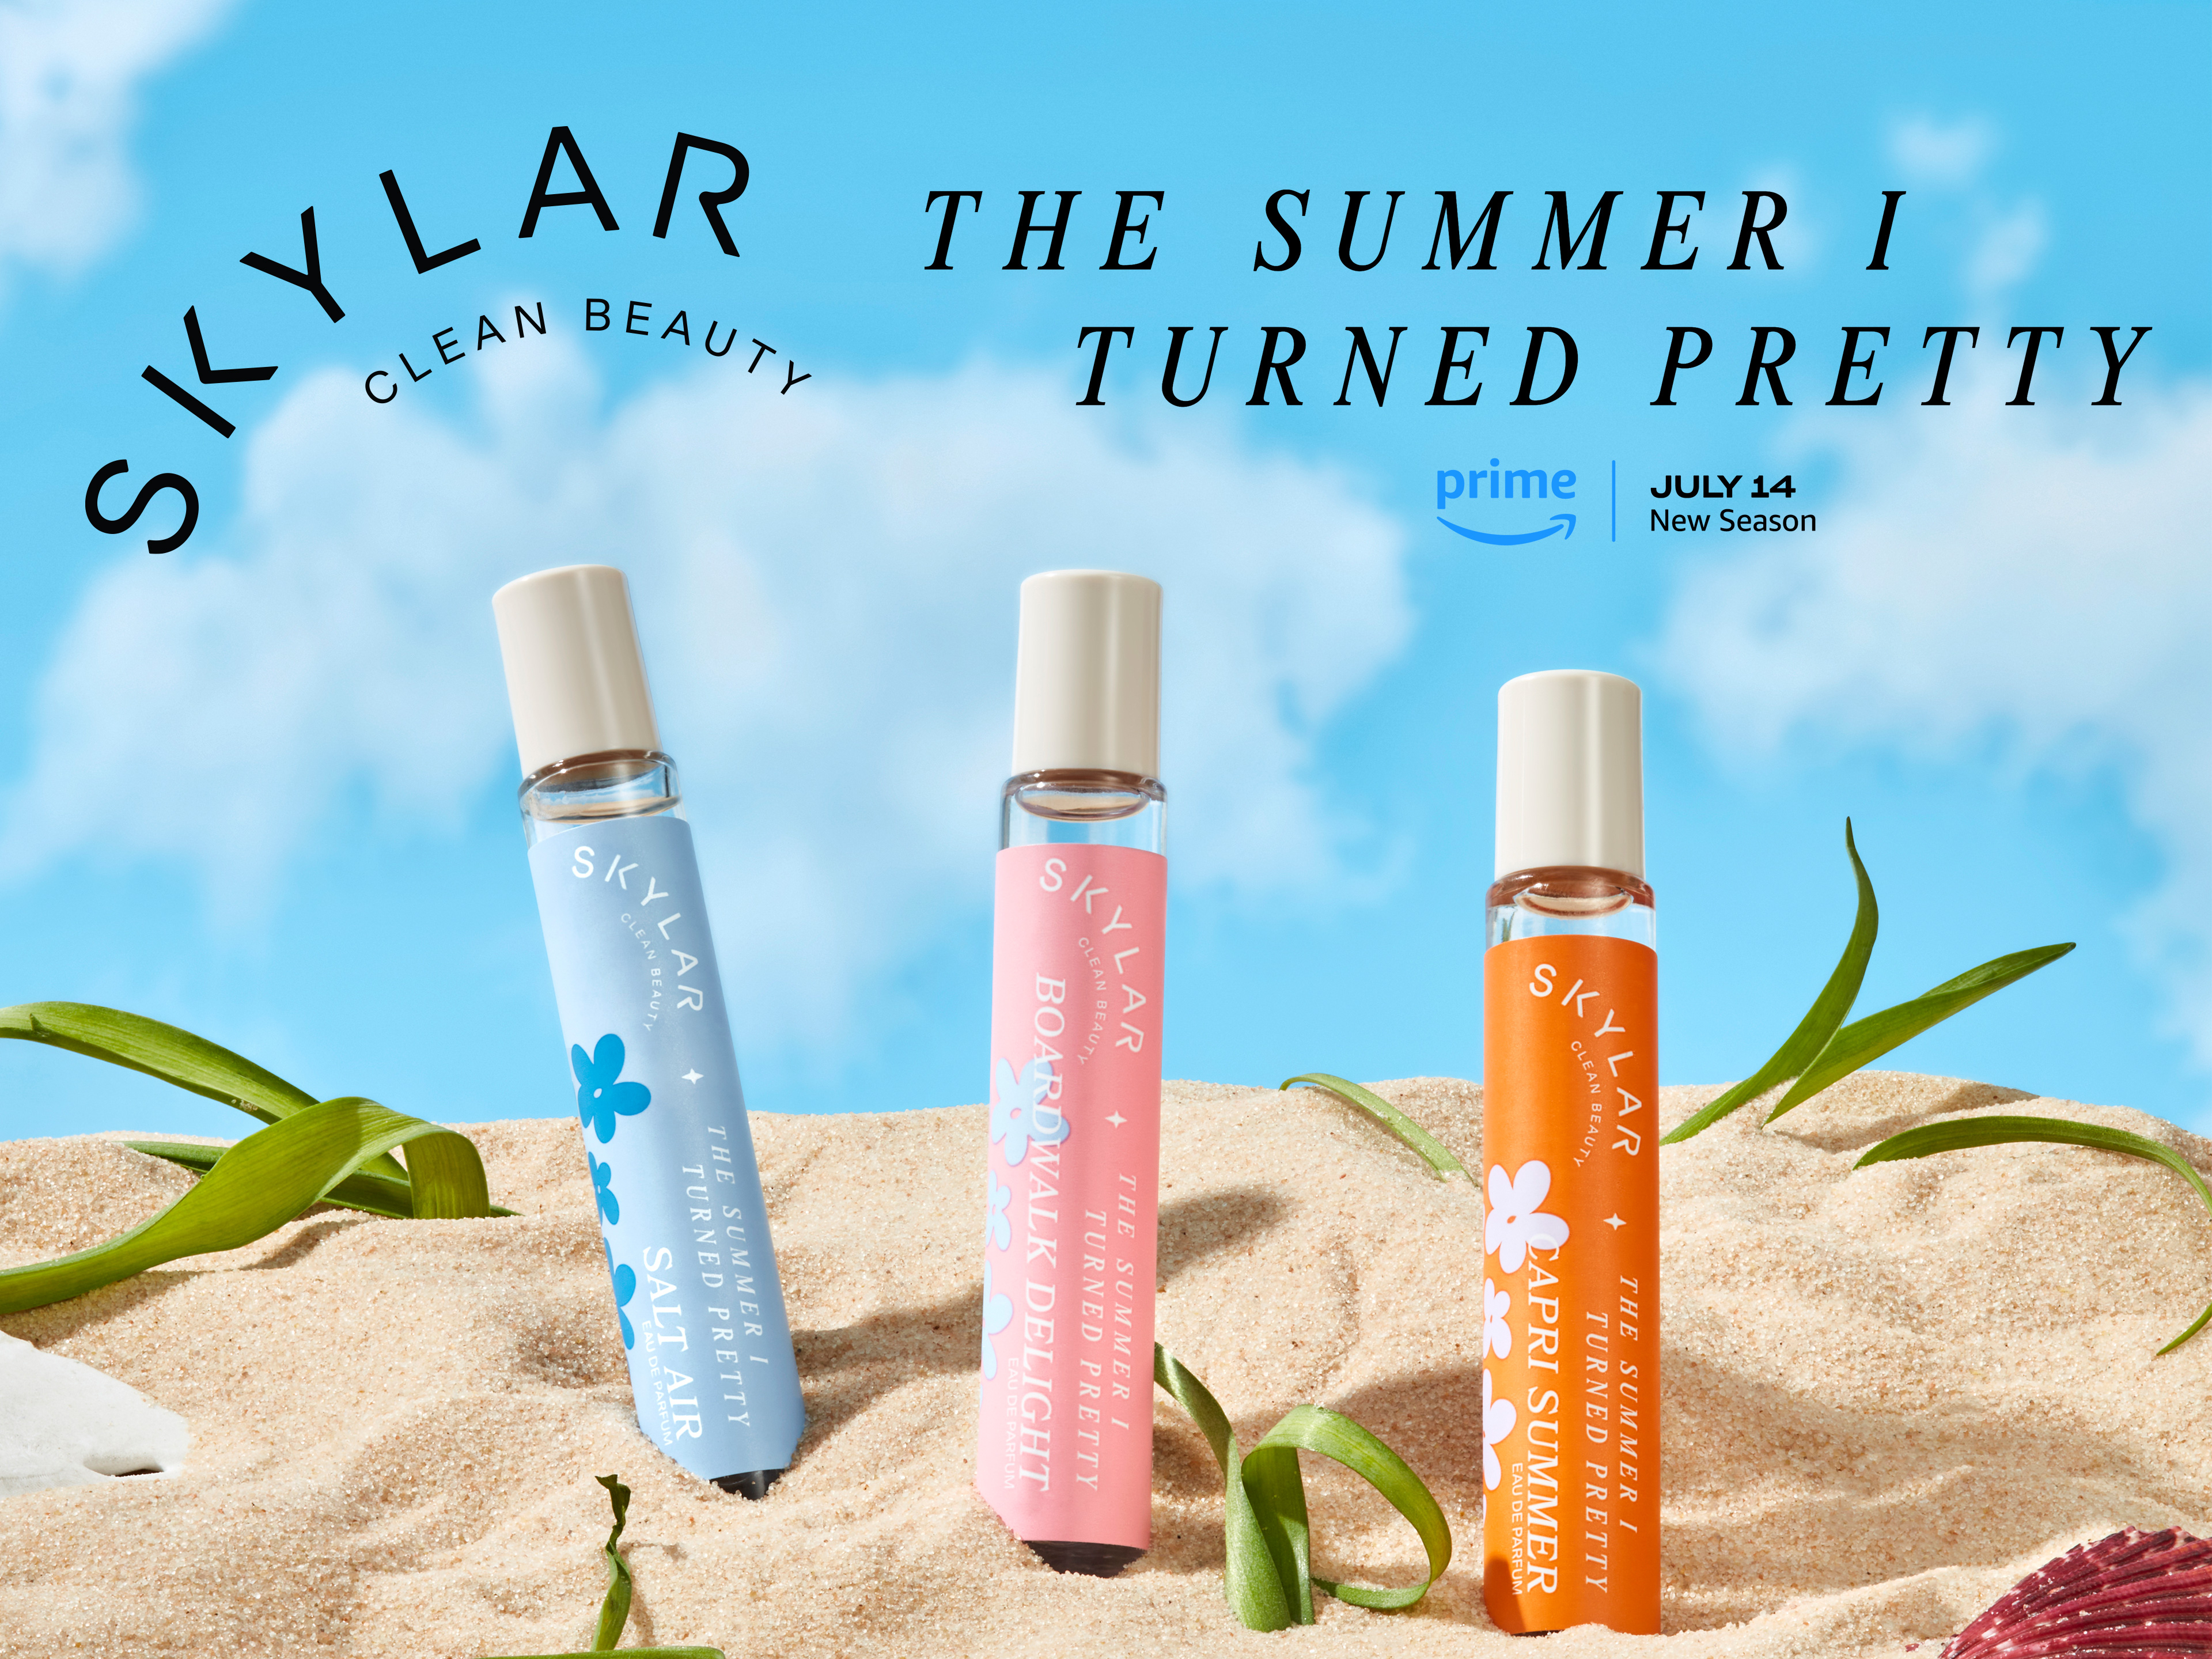 Skylar Collaborates With Amazon Prime Video to Capture the Scents of The Summer I Turned Pretty Business Wire